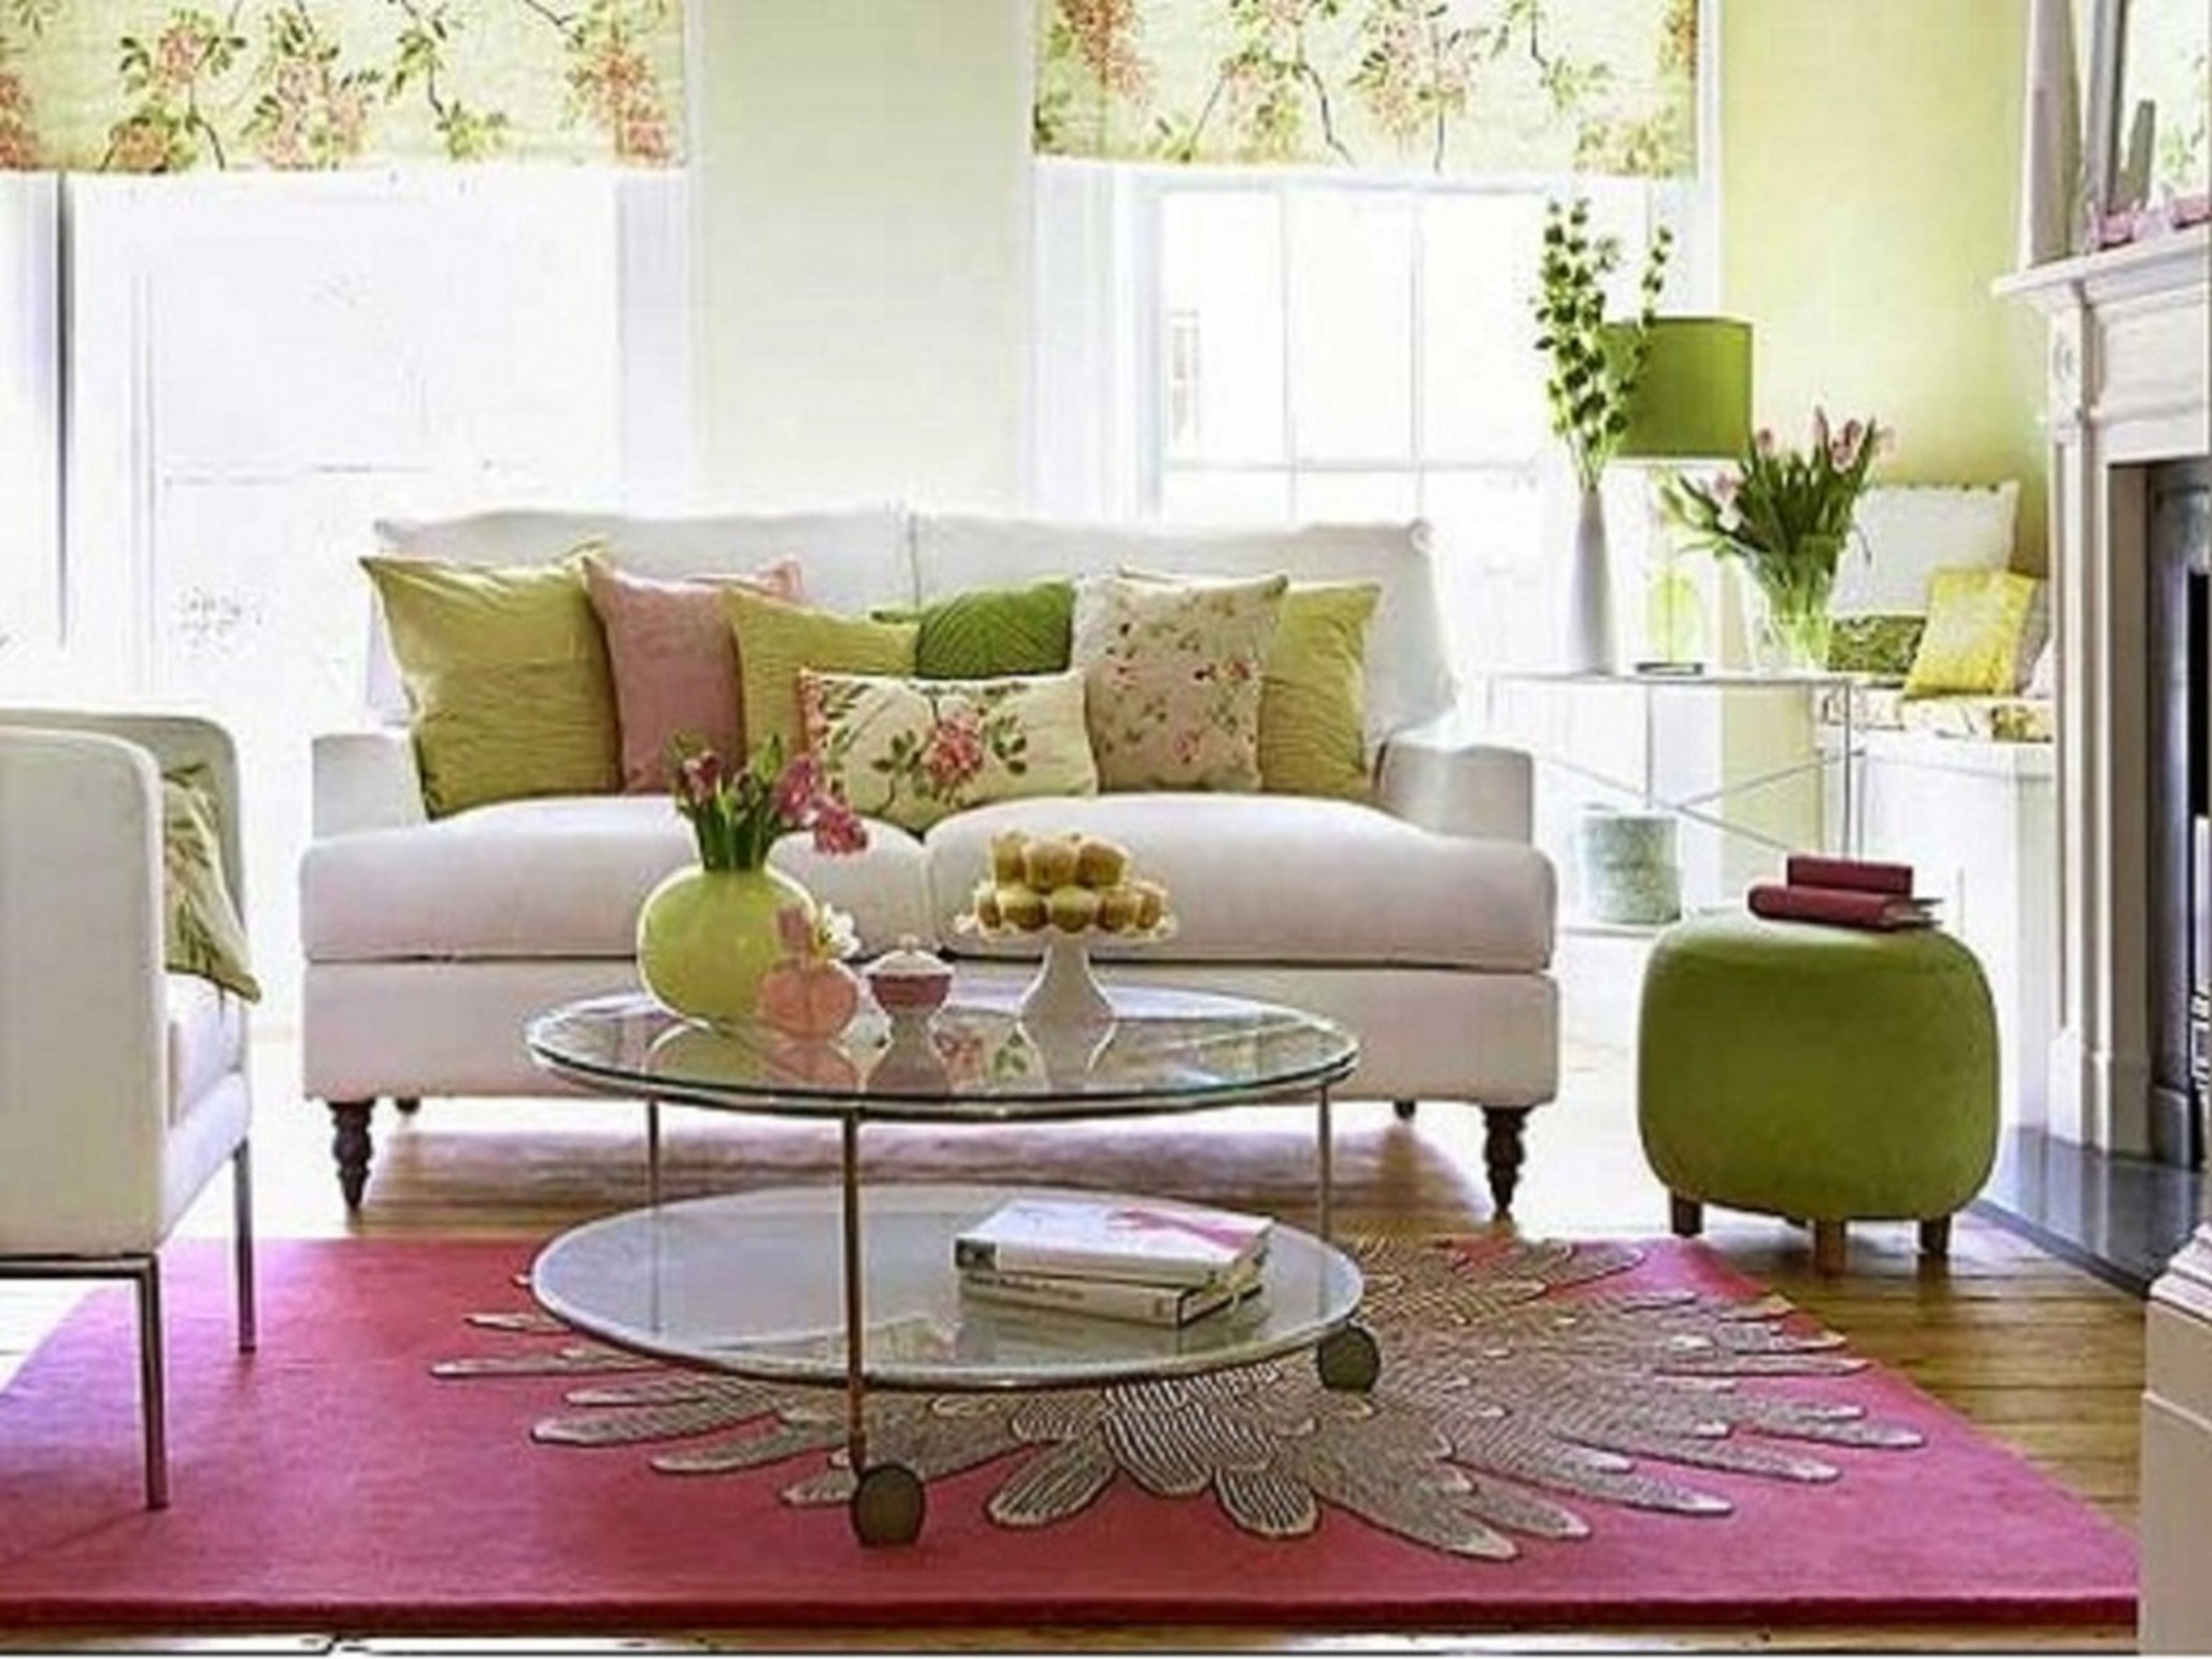 Home Decor Decorating Ideas: Transform Your Space With Creative Ideas